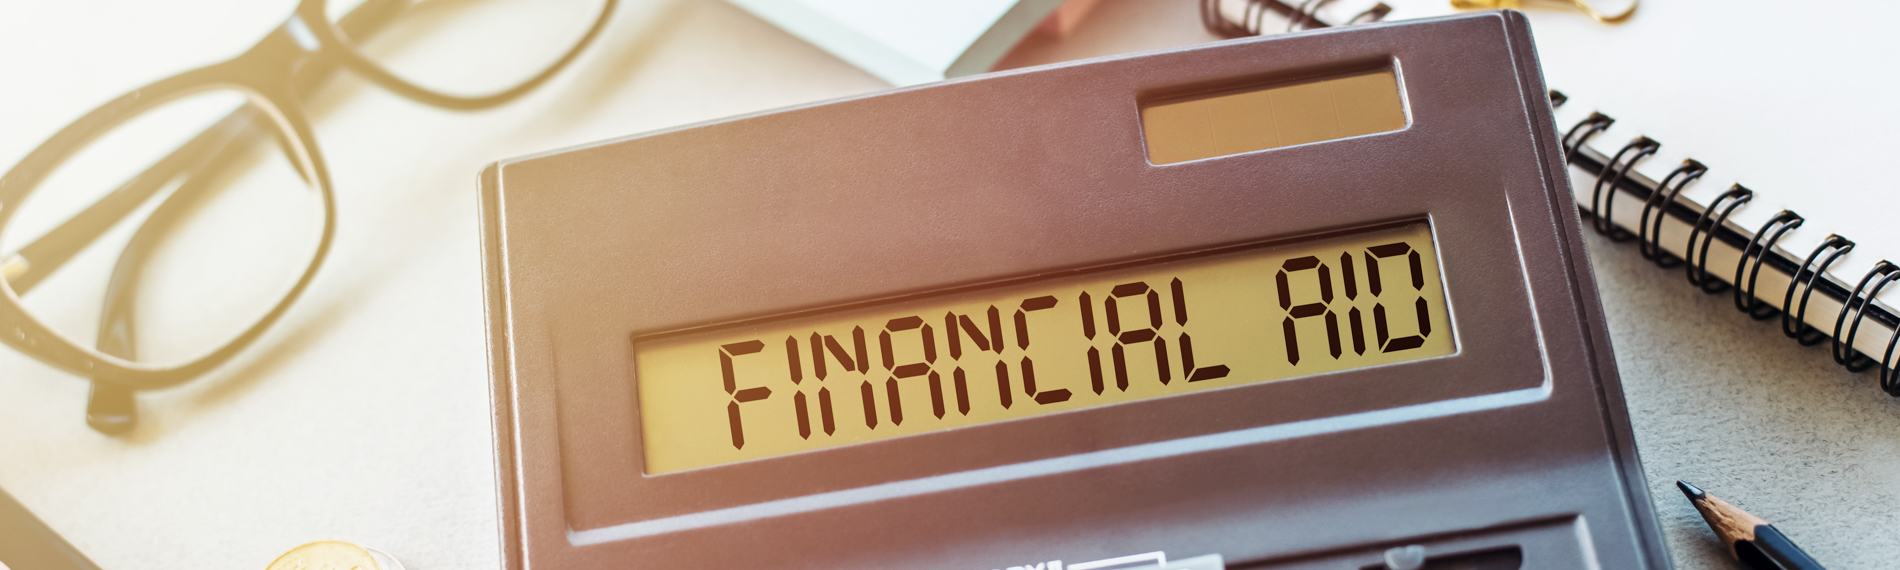 An image of a calculator displaying financial aid